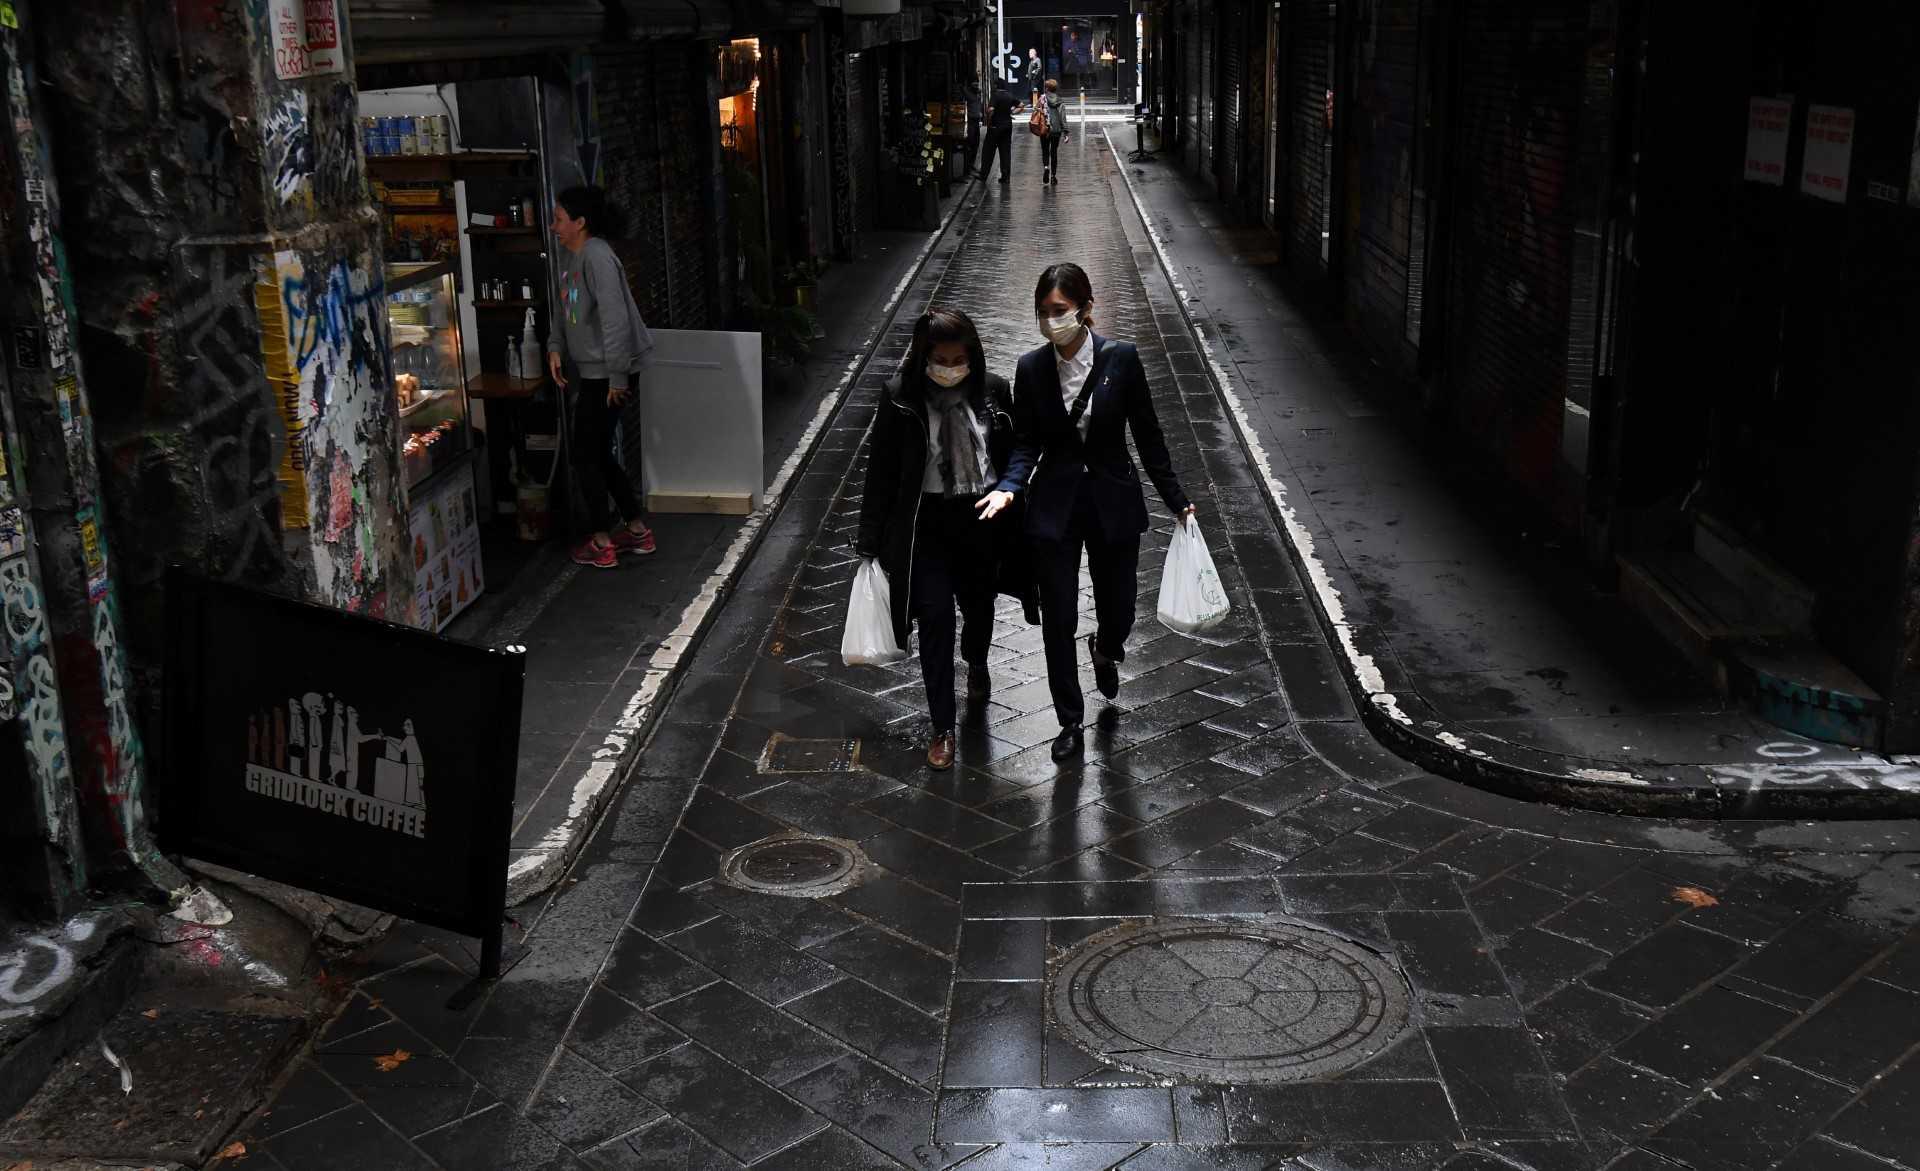 People walk through a small deserted laneway usually packed with open cafes and people during their lunchtime in Melbourne on May 4, 2020. Photo: AFP